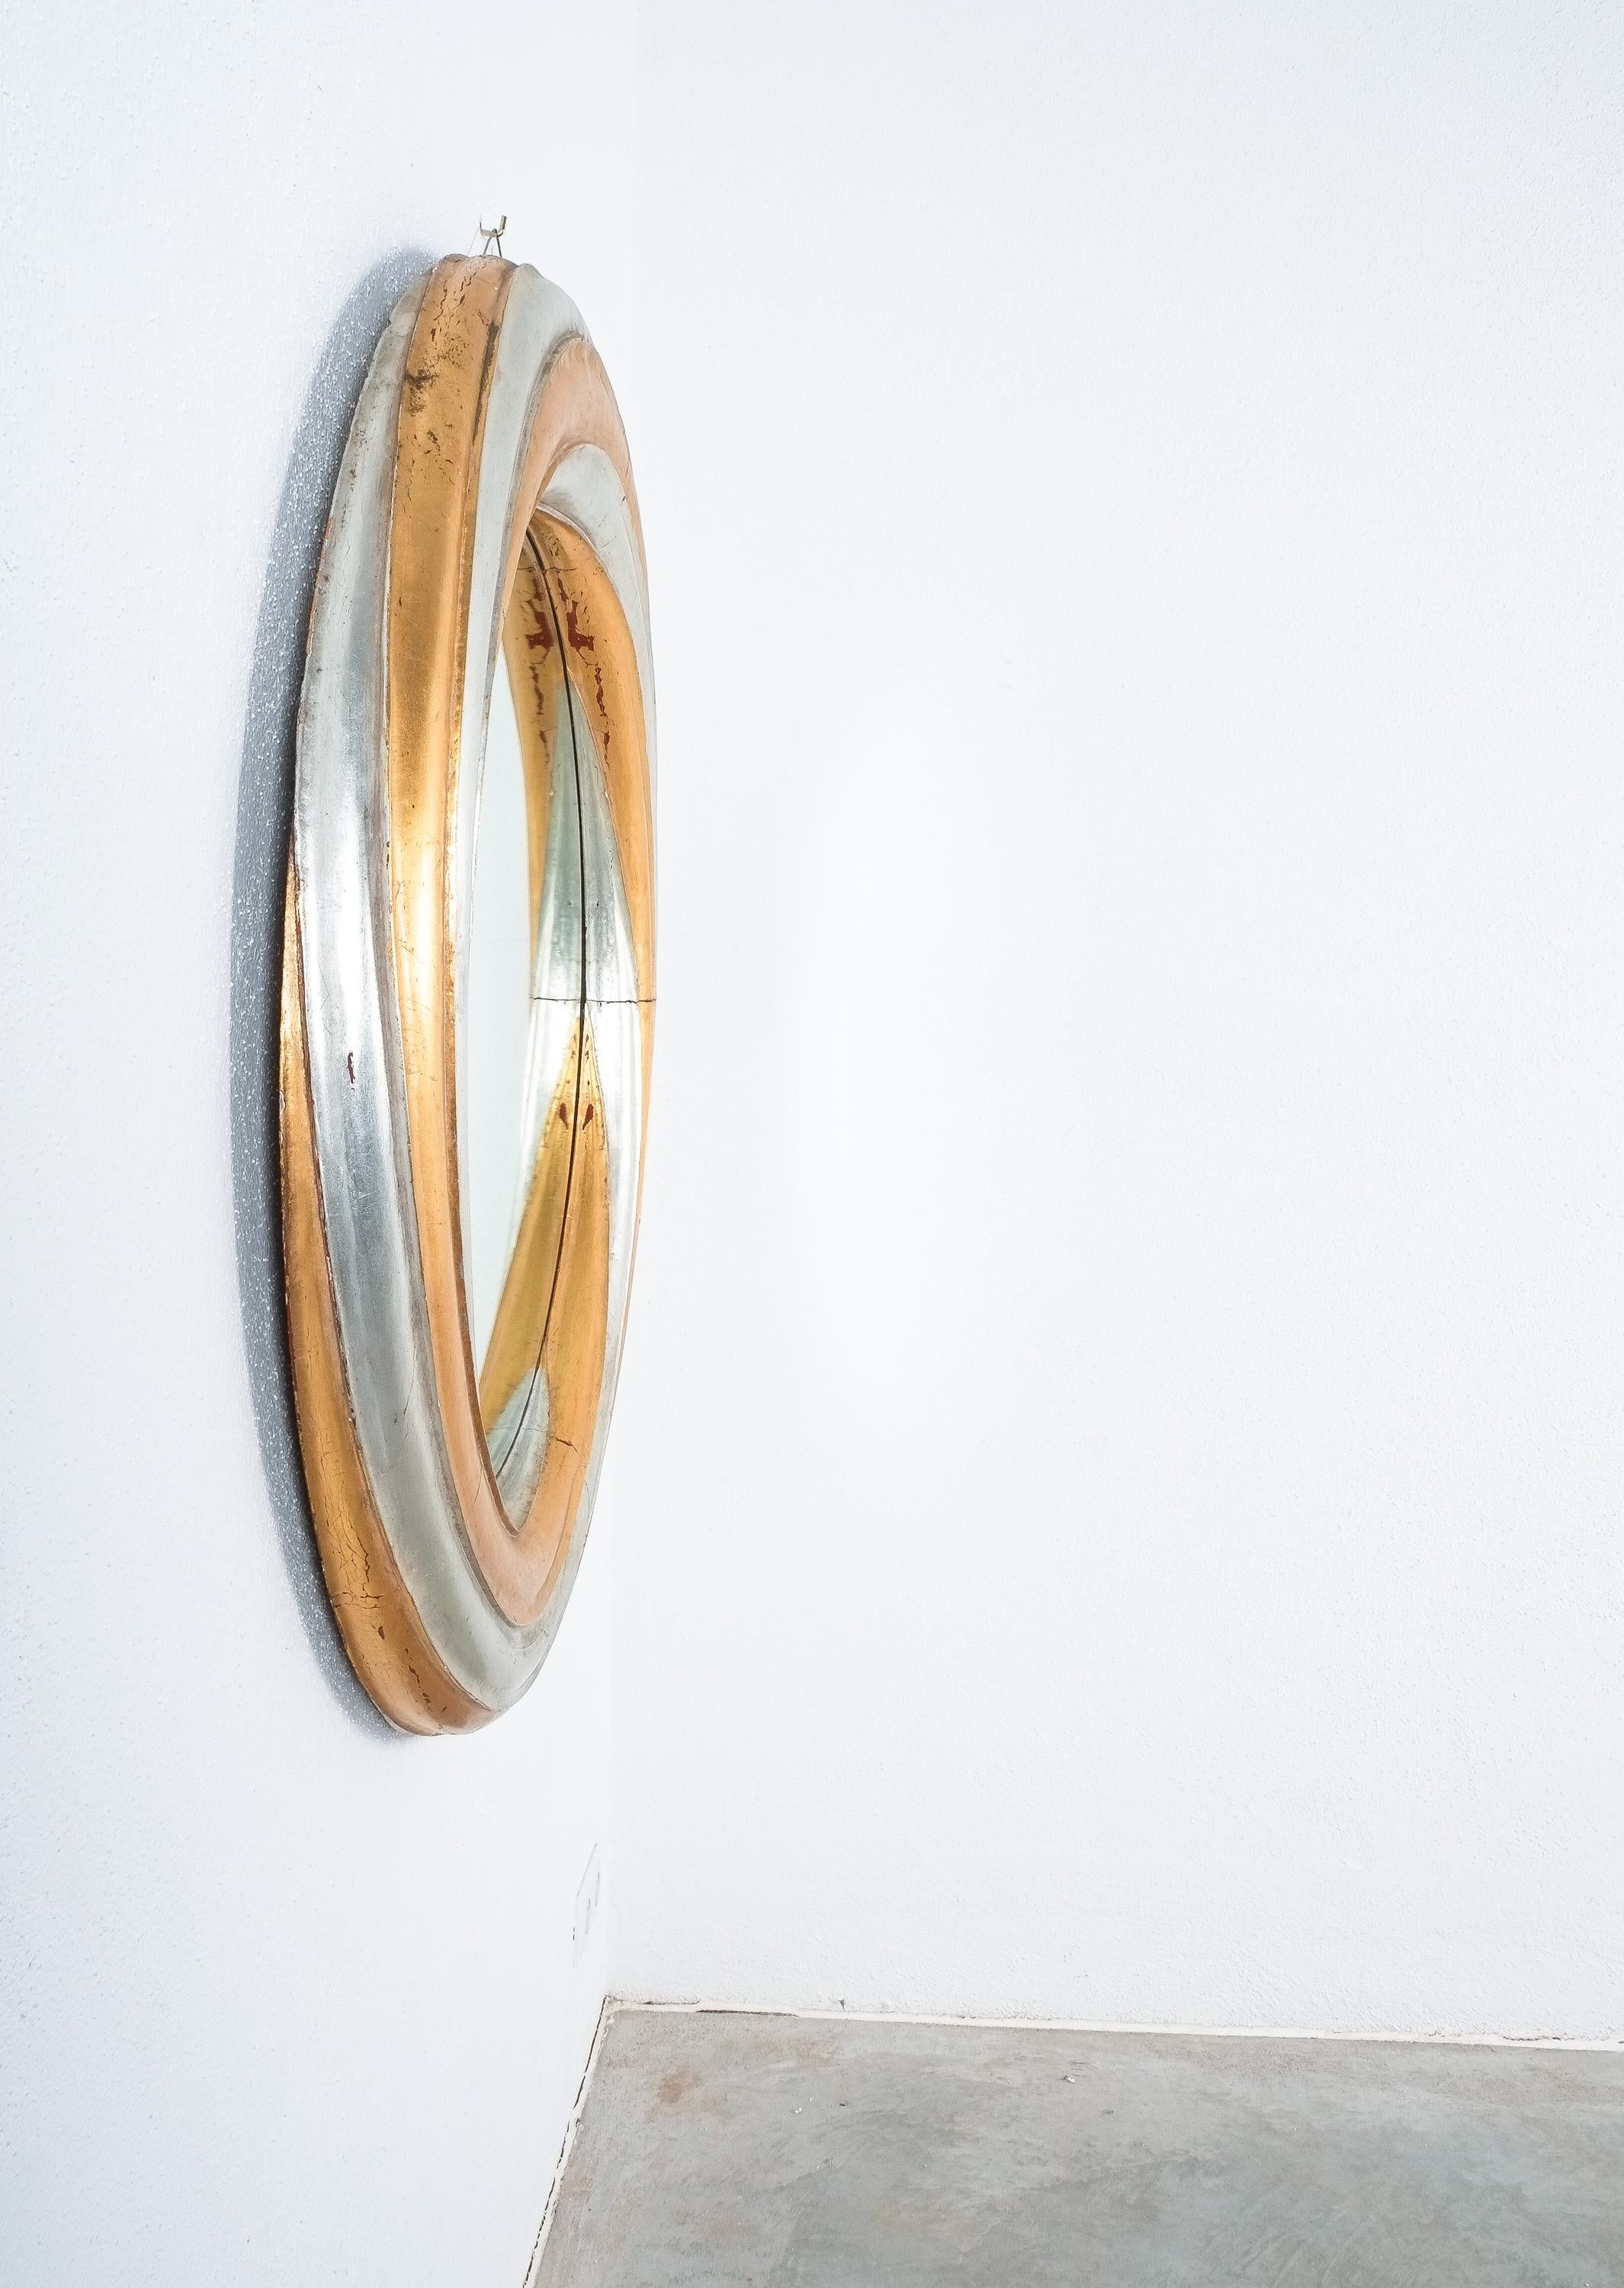 Large Wood Swirl Trompe l’oeil Wall Mirror, Italy For Sale 1